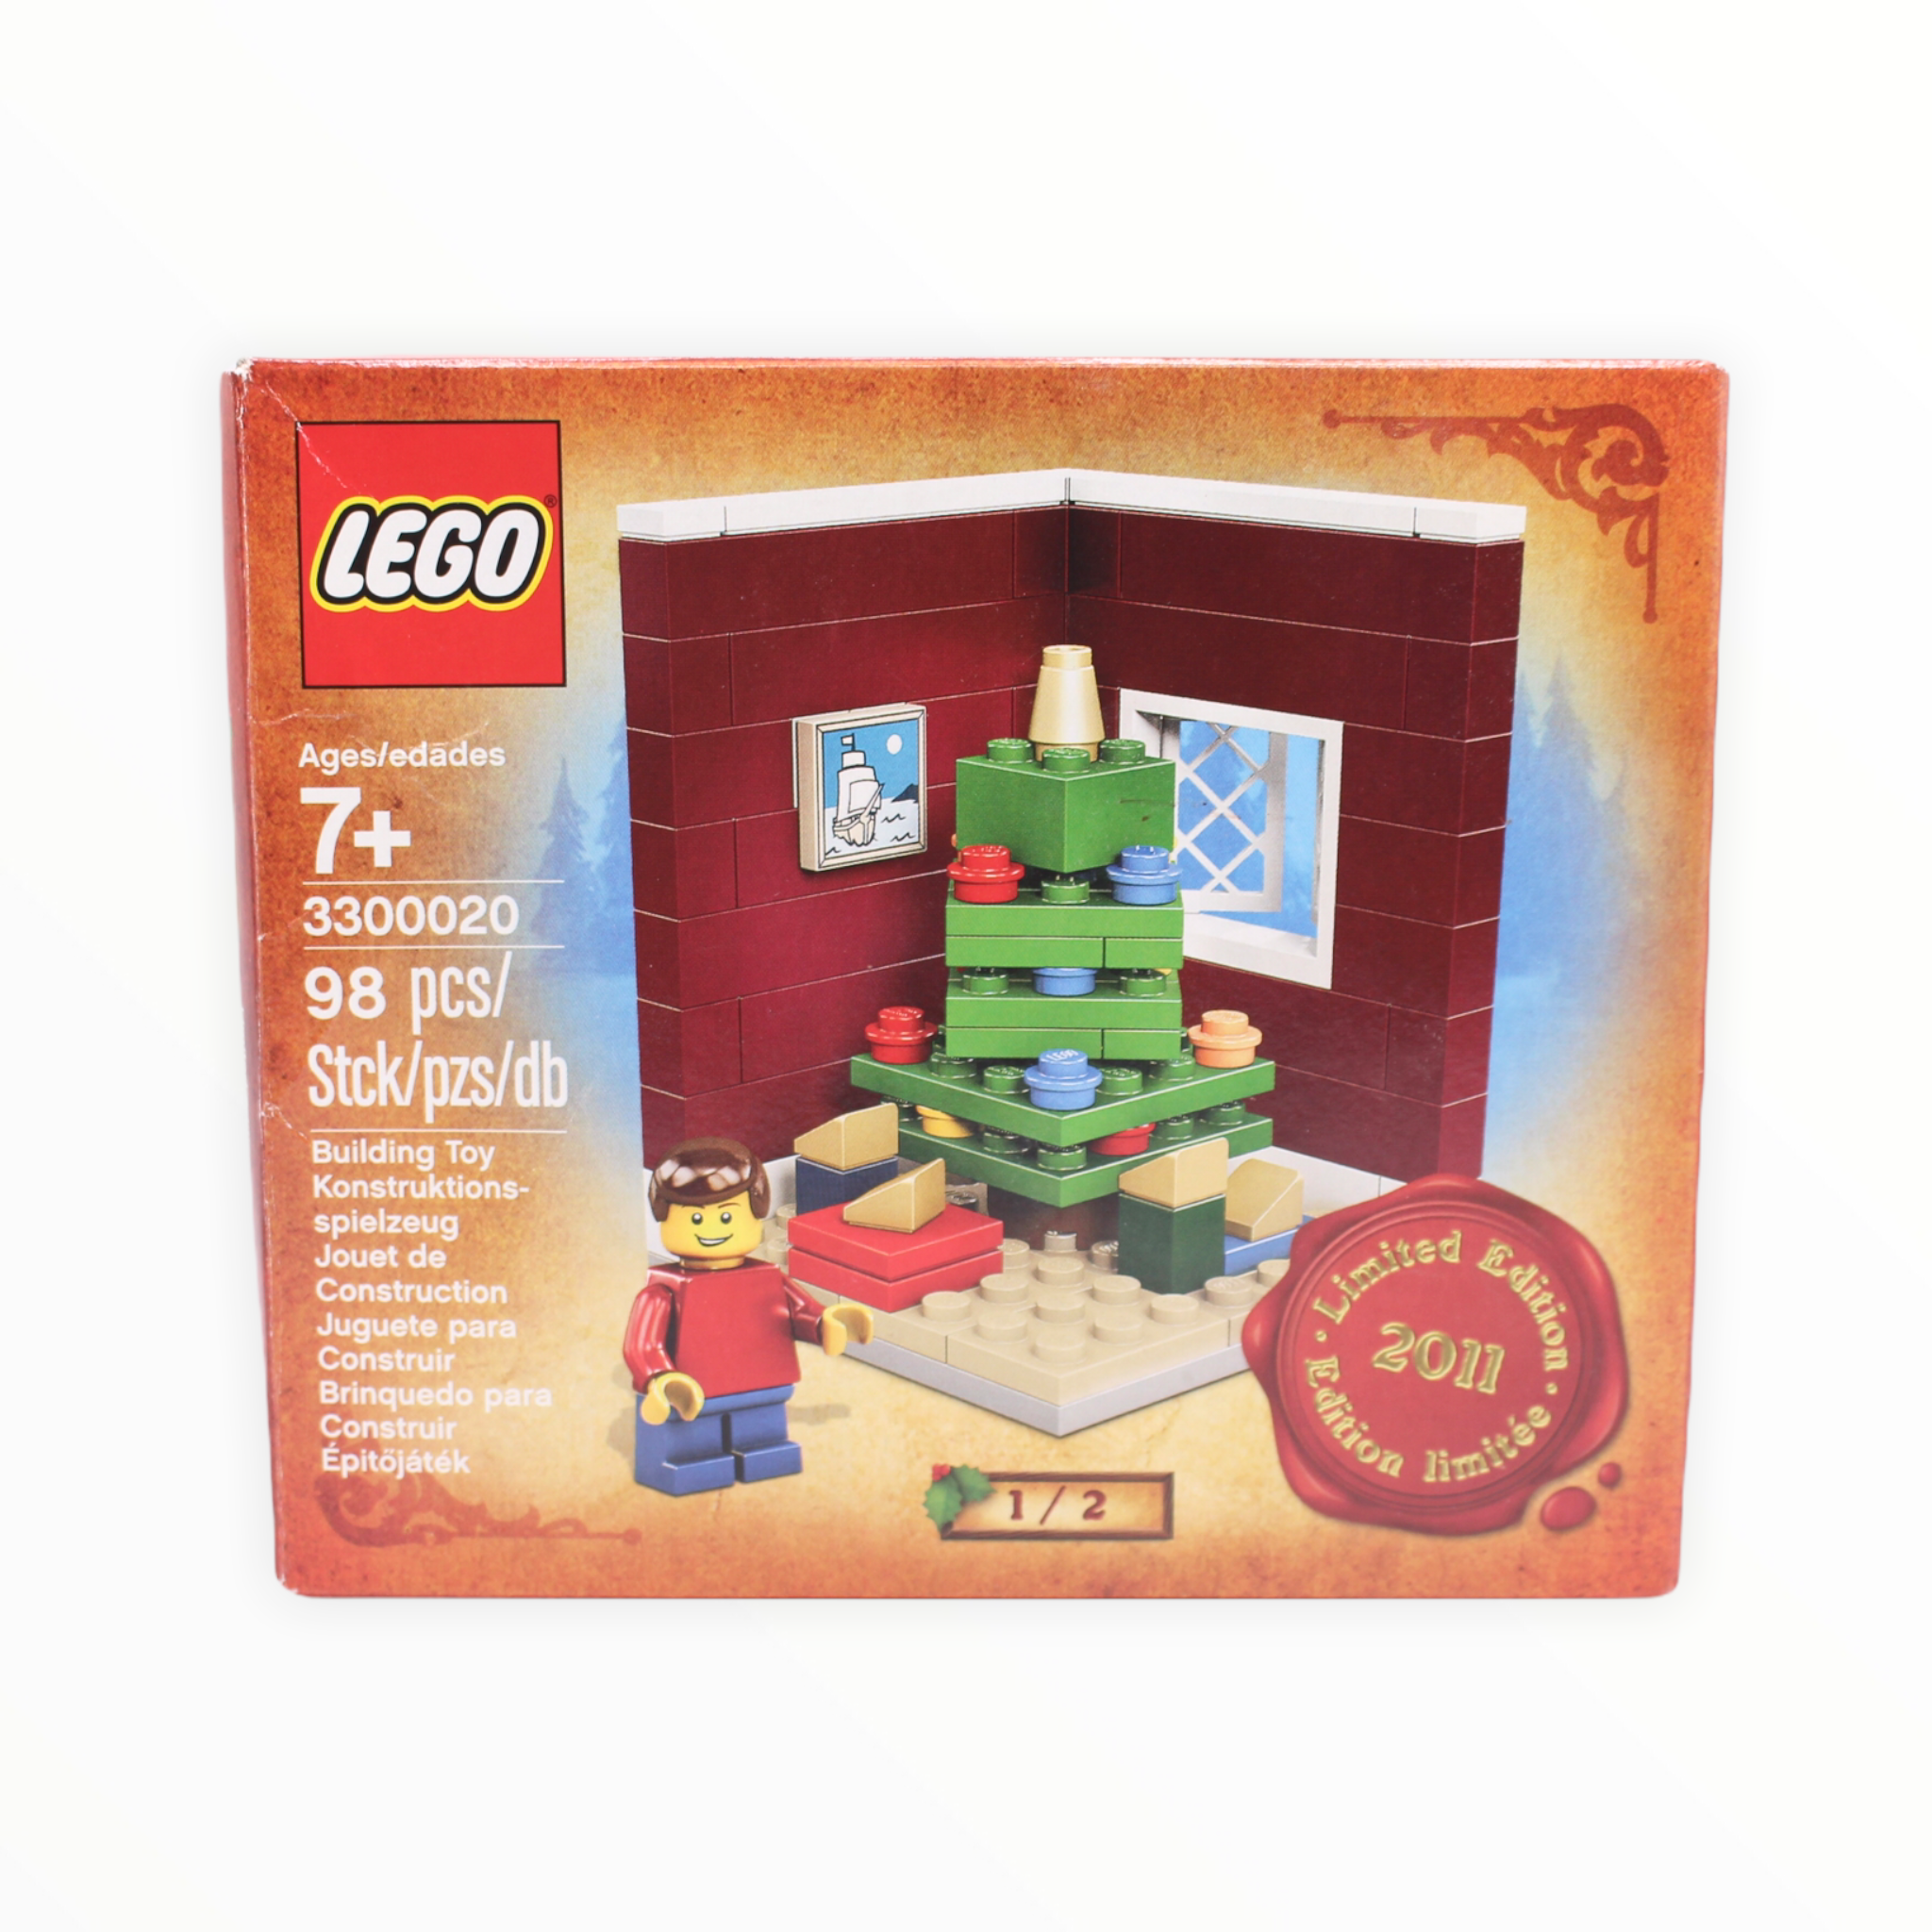 Certified Used Set 3300020 LEGO Christmas Tree Scene - Limited Edition 2011 Holiday Set (1 of 2)